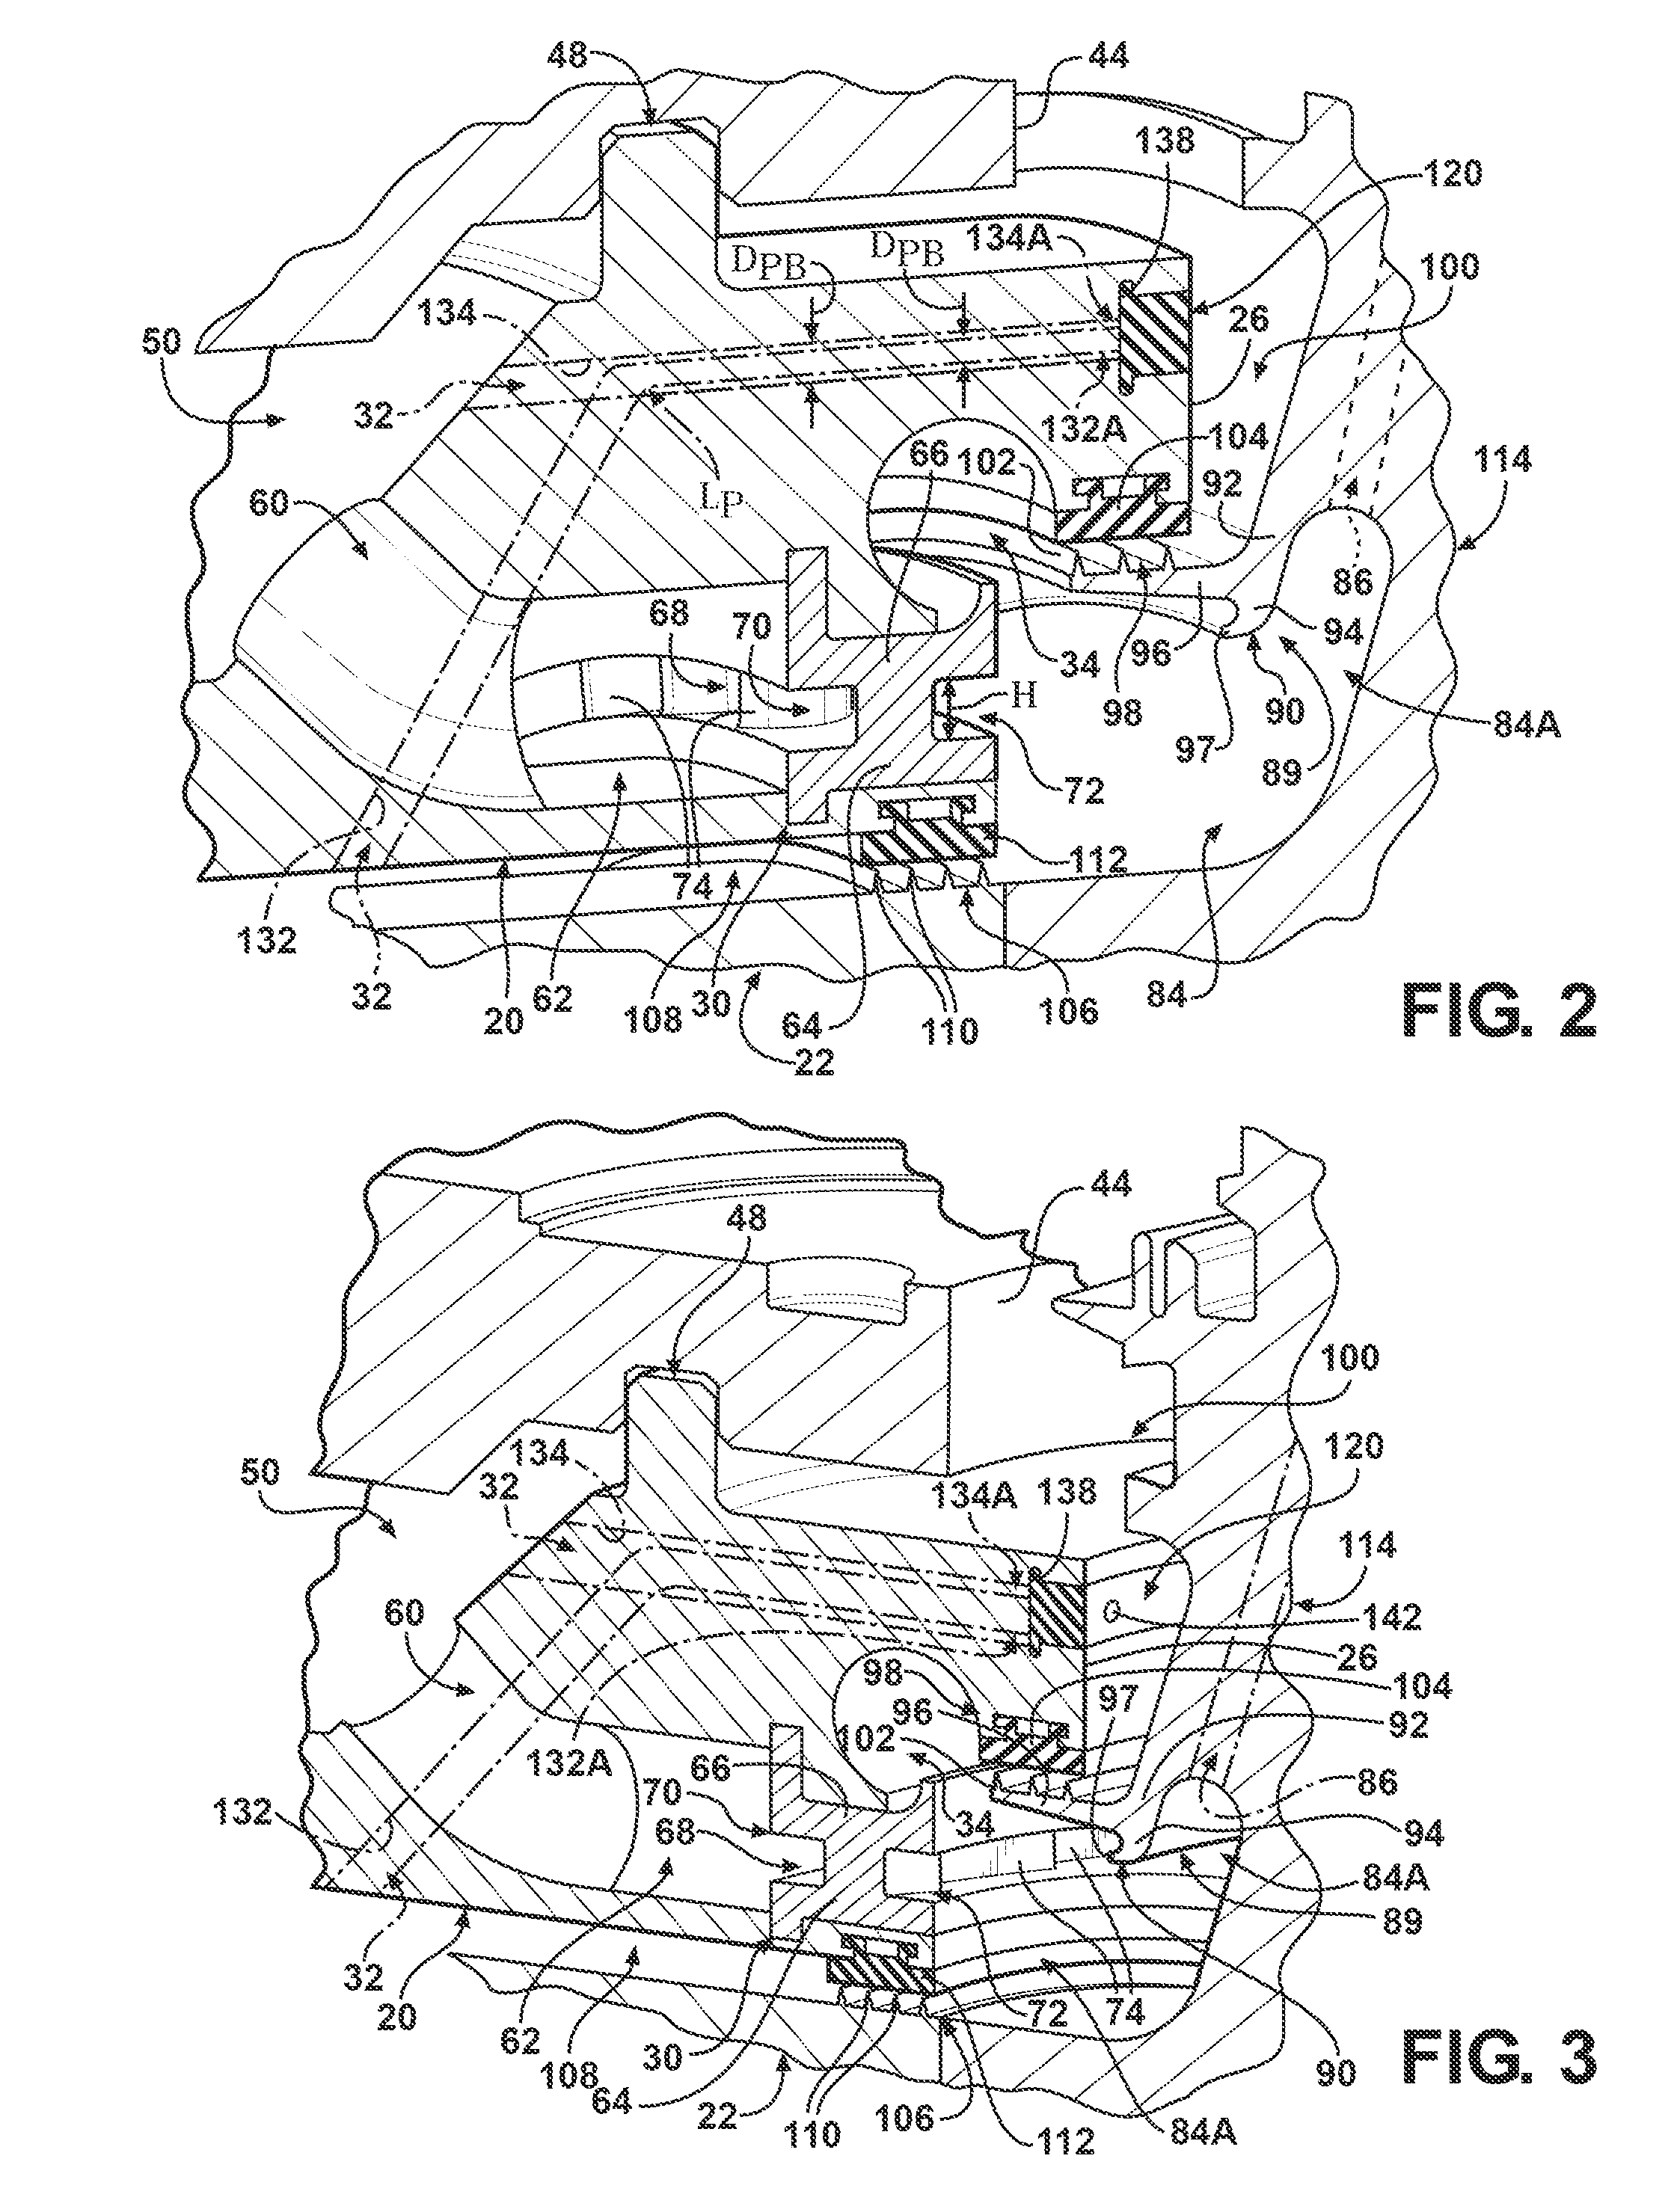 Radial pre-swirl assembly and cooling fluid metering structure for a gas turbine engine